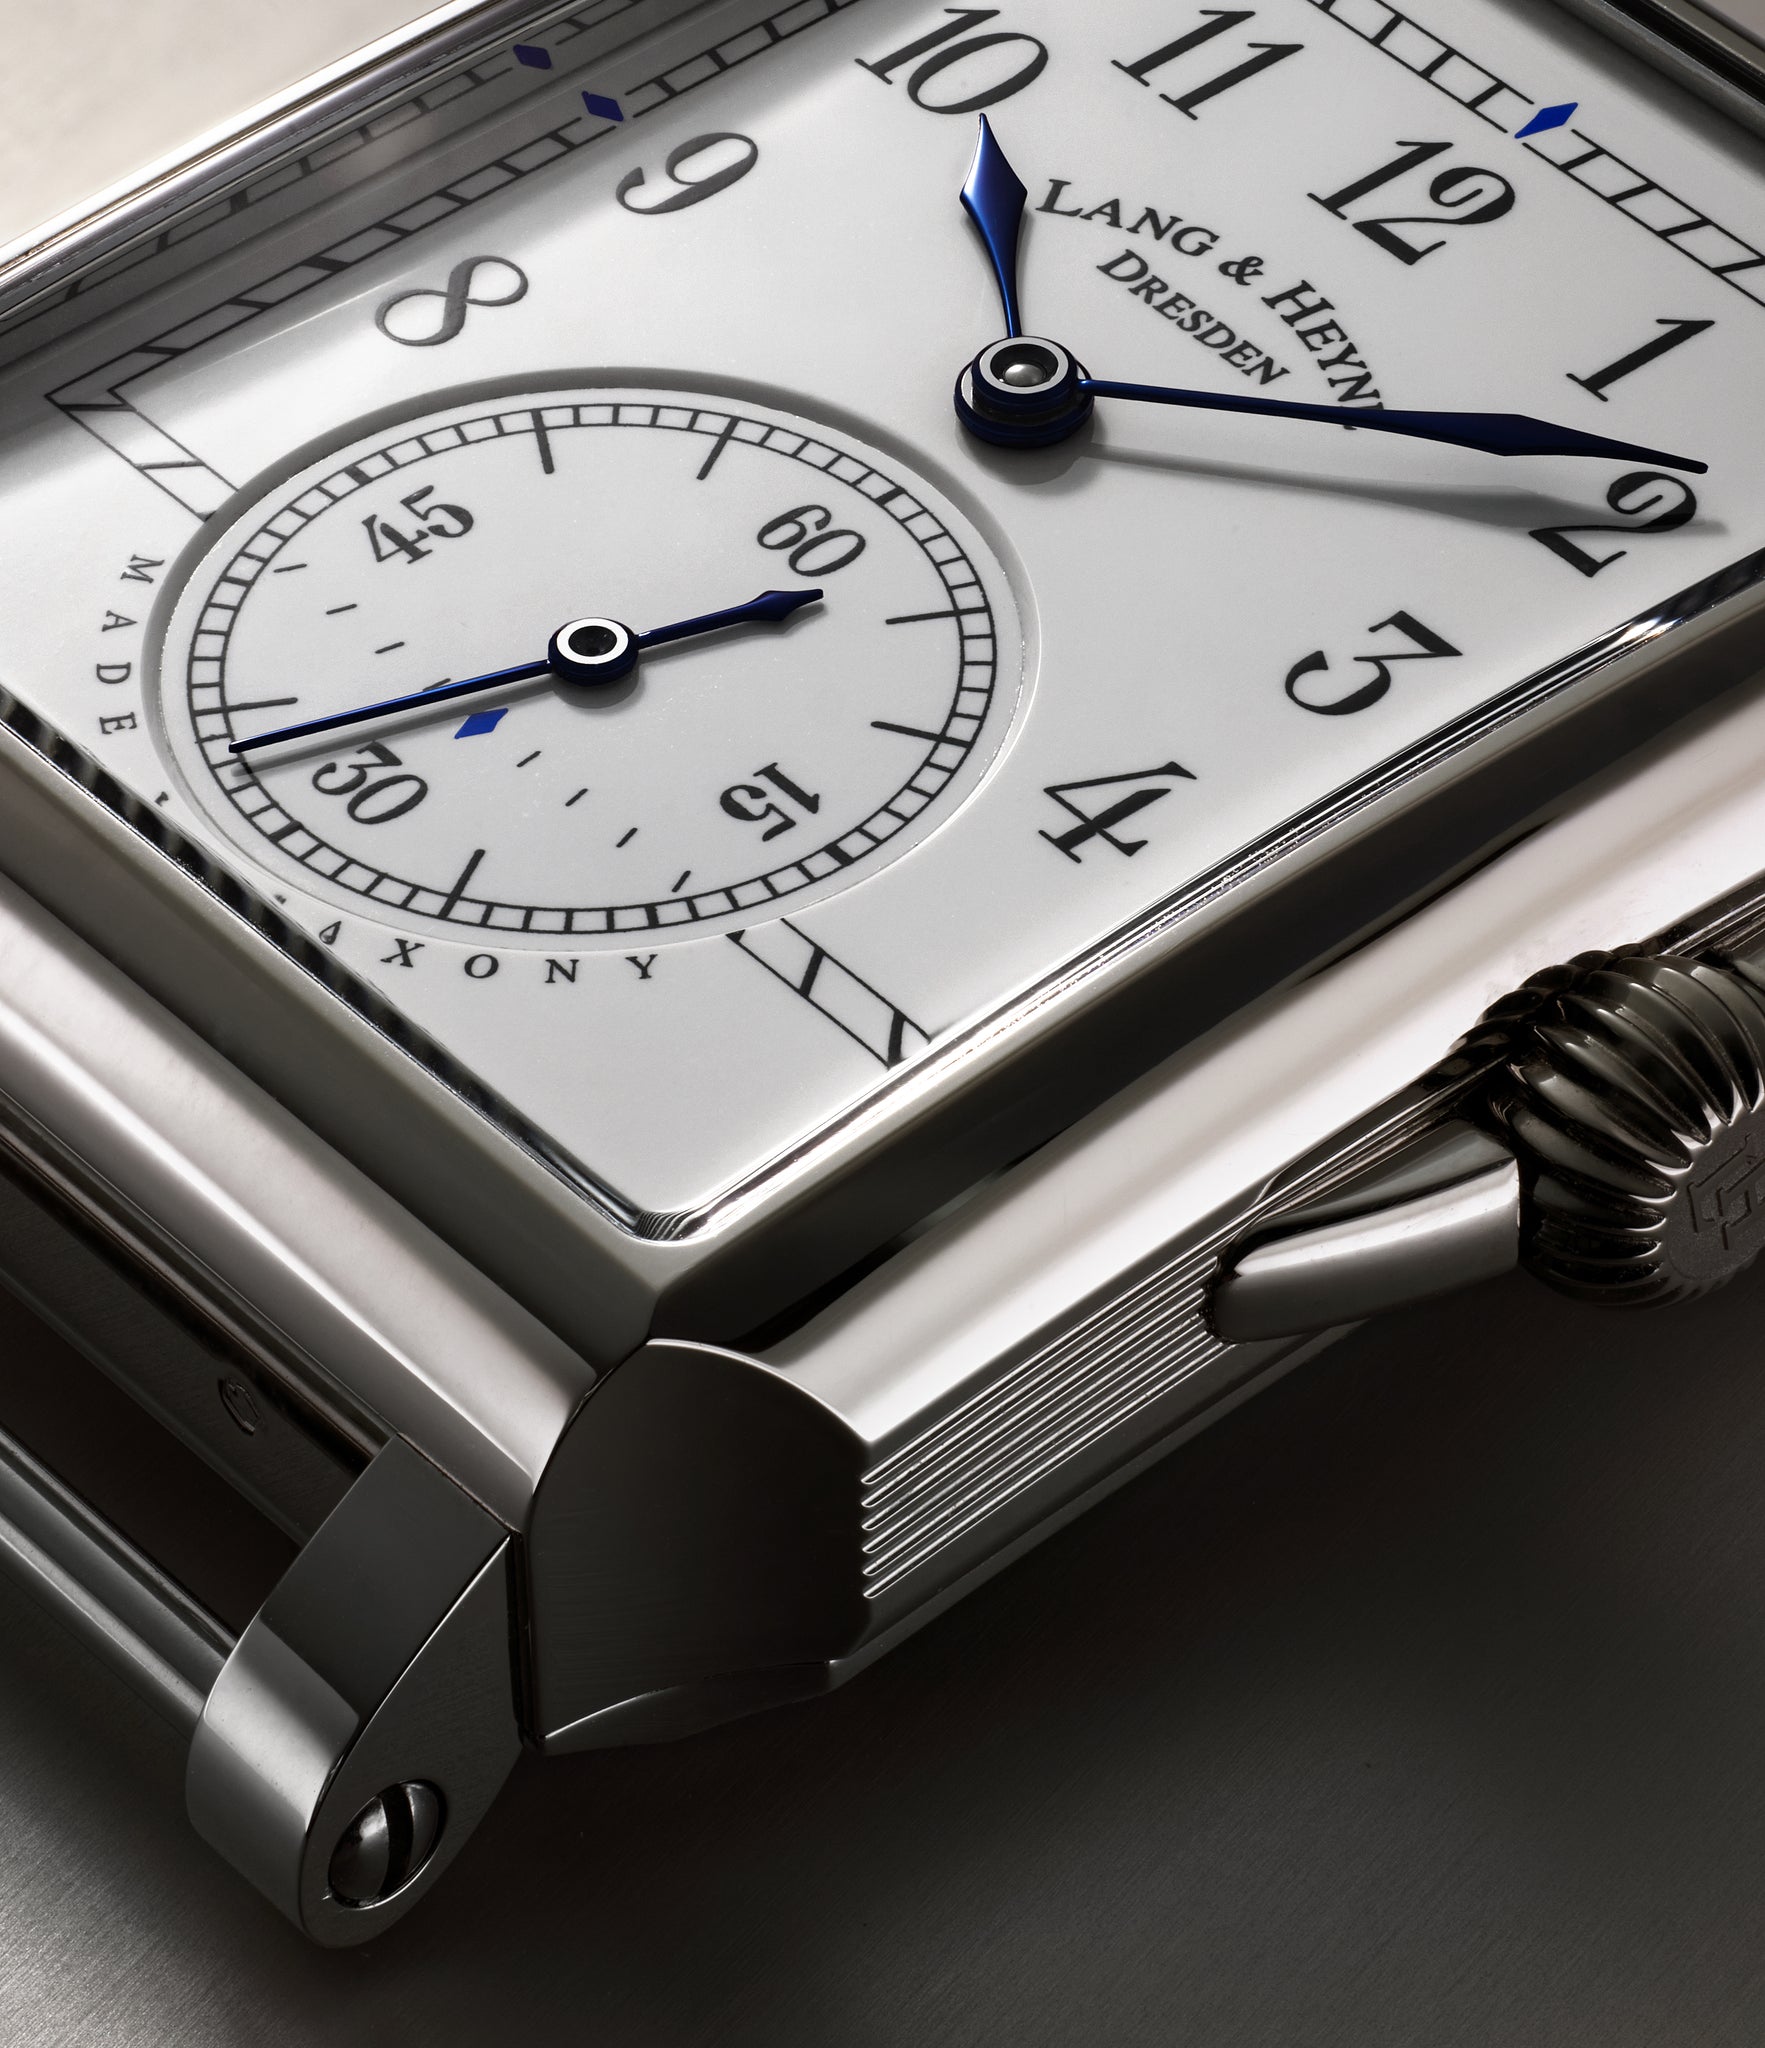 selling Lang & Heyne Georg  Platinum preowned watch at A Collected Man London